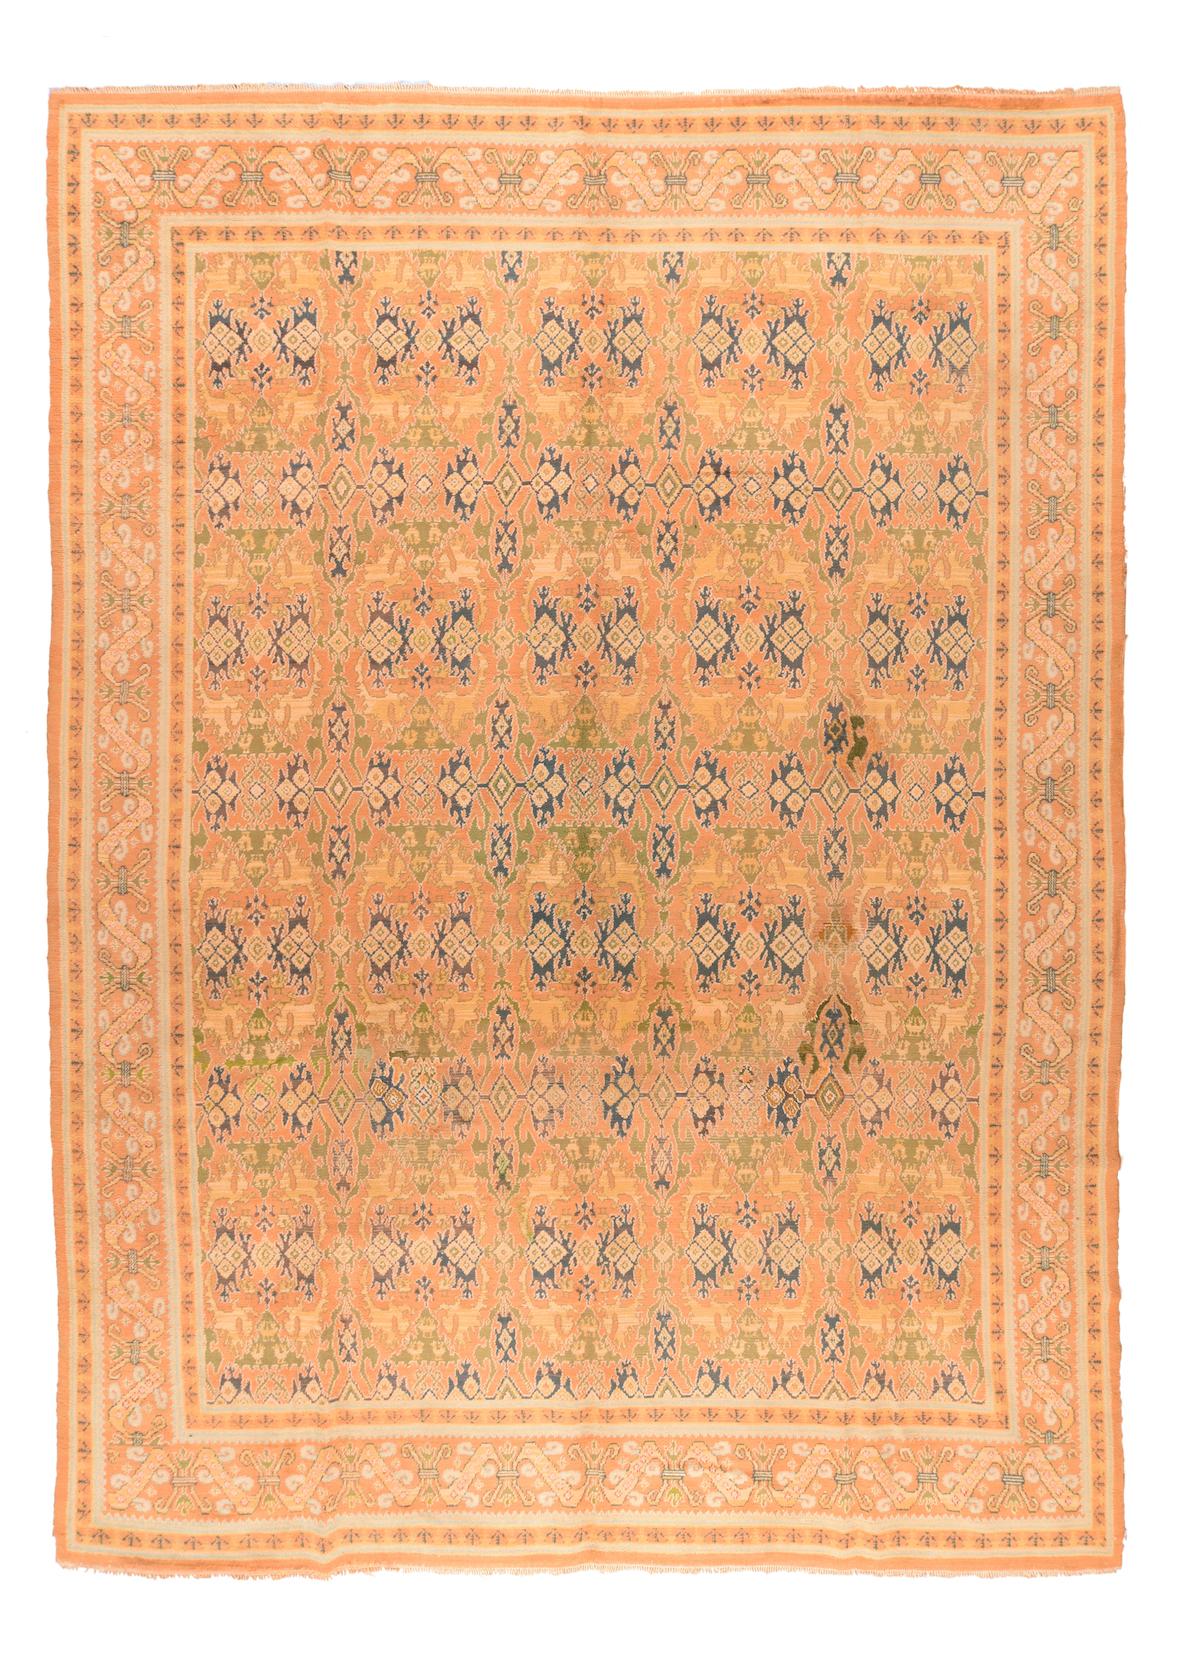 Early 20th Century Antique Spanish Rug For Sale